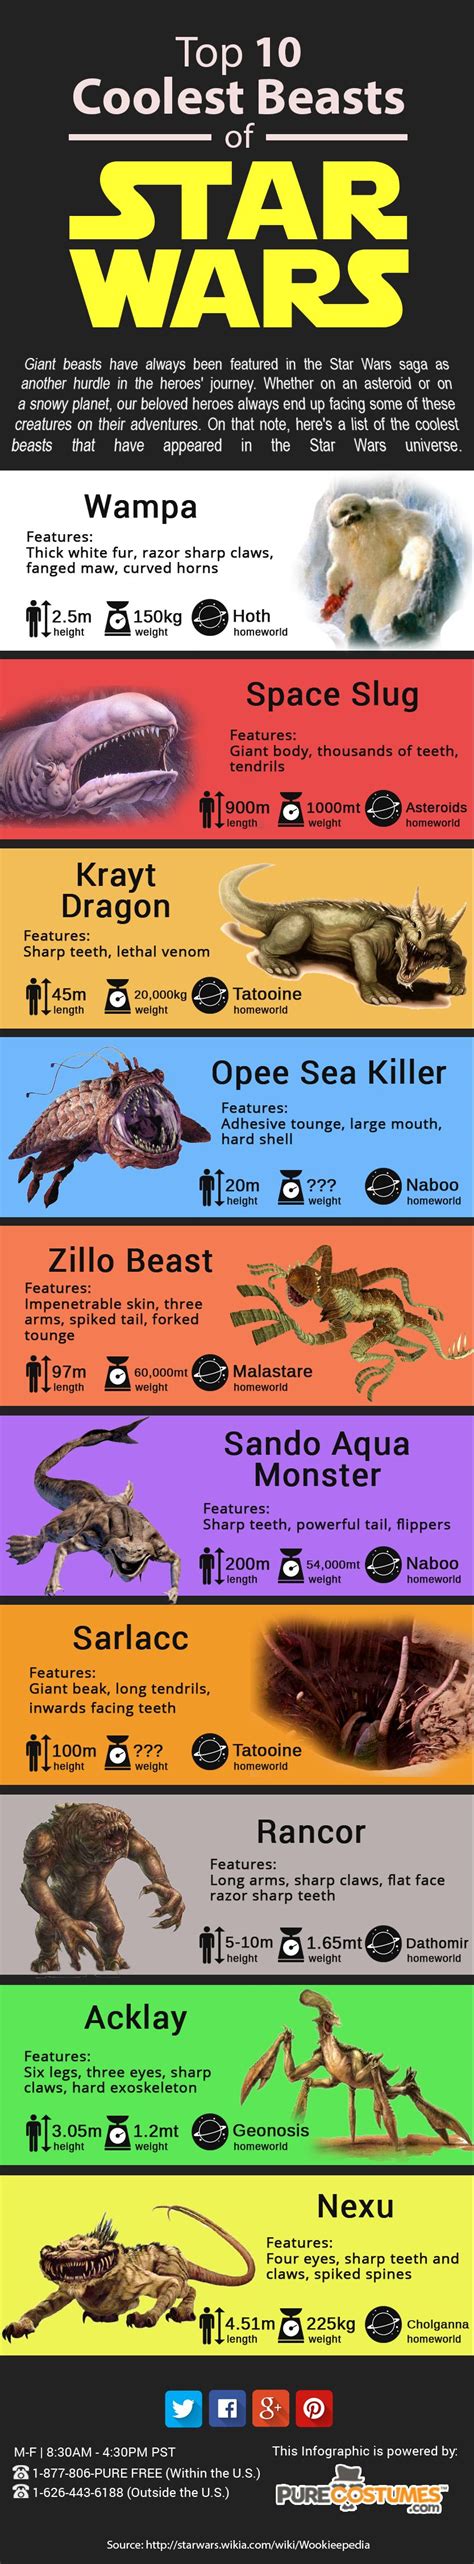 Top 10 Coolest Beasts From The Star Wars Universe Infographic Star